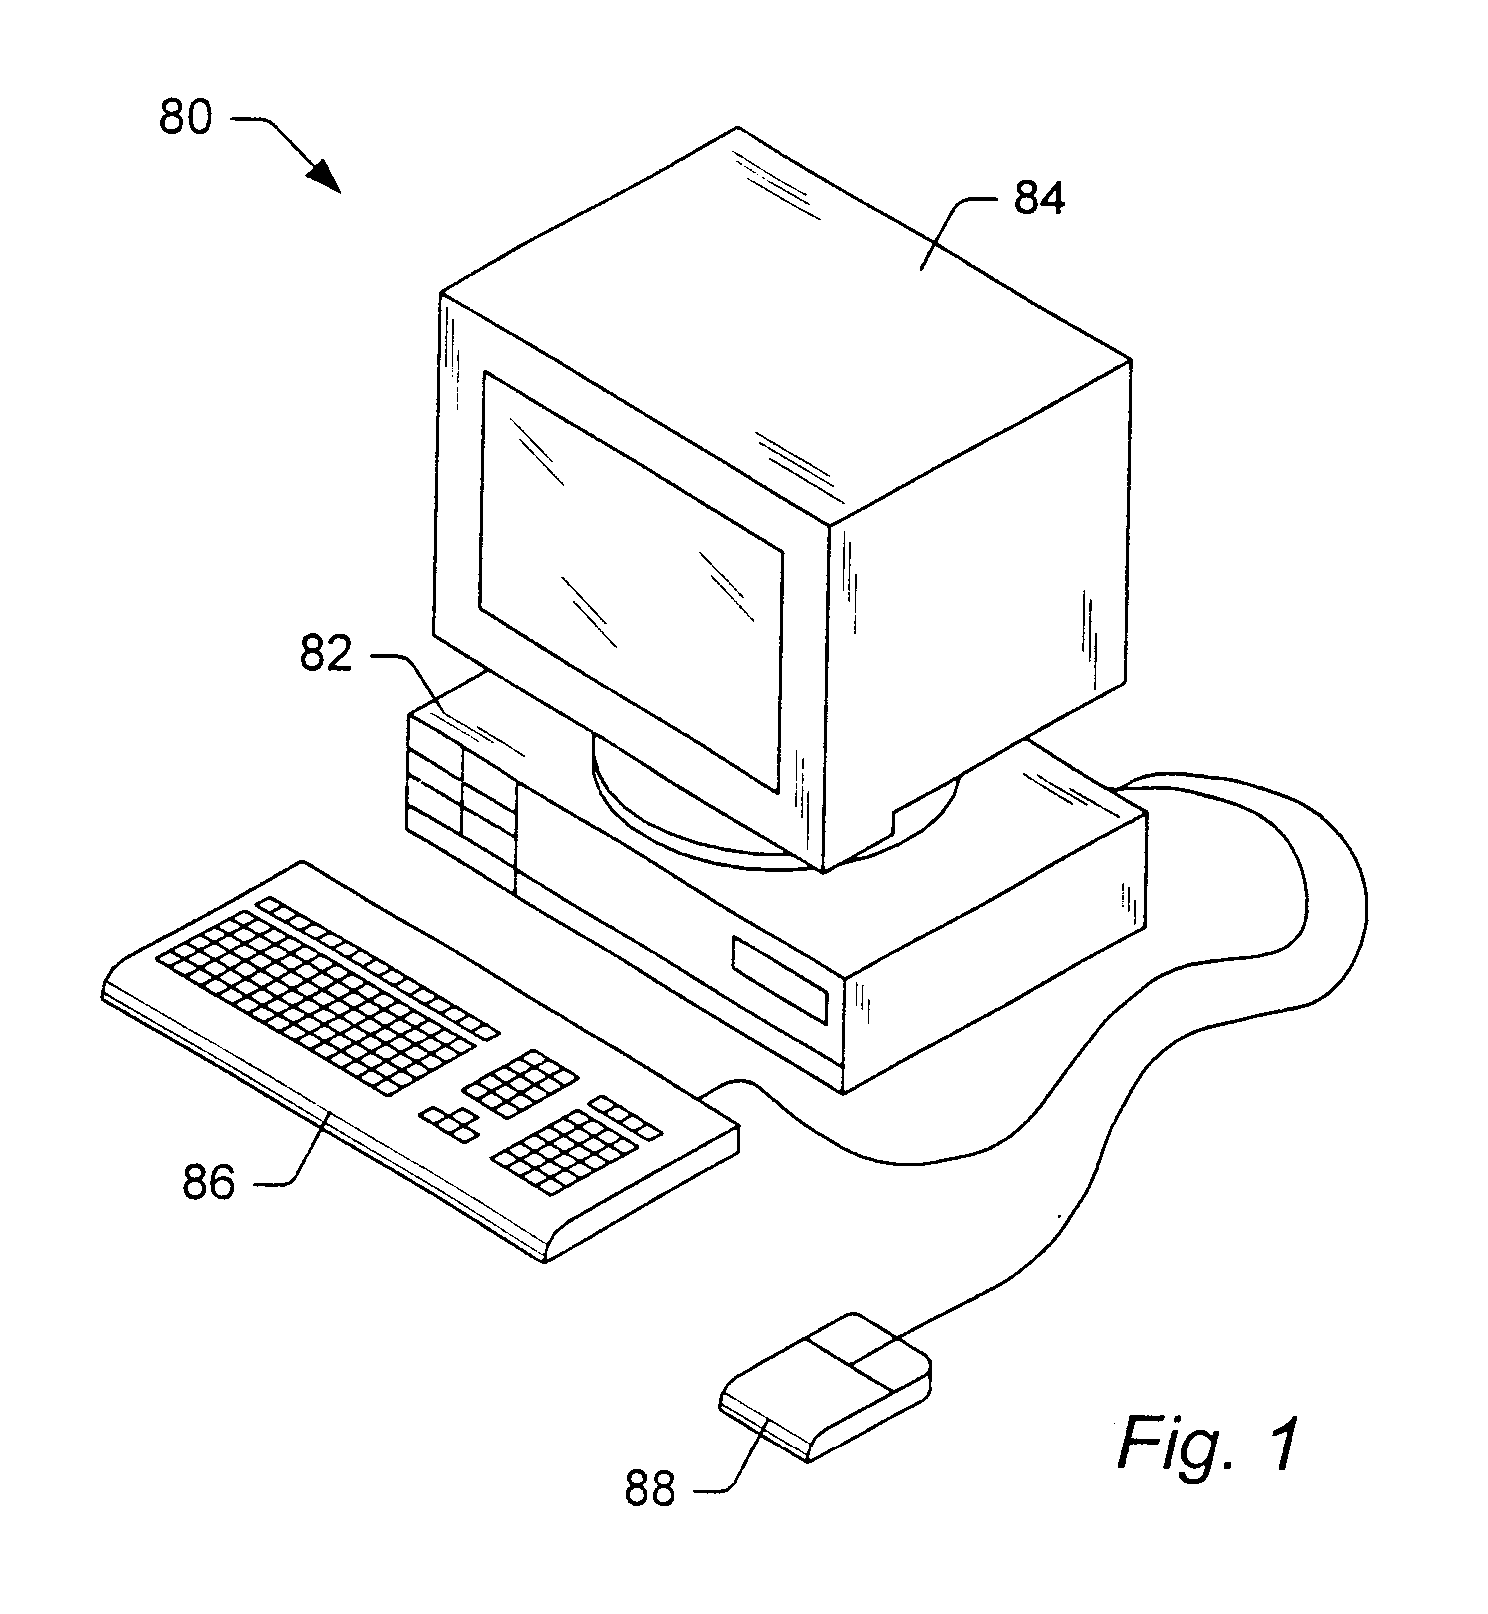 Multi-channel, demand-driven display controller